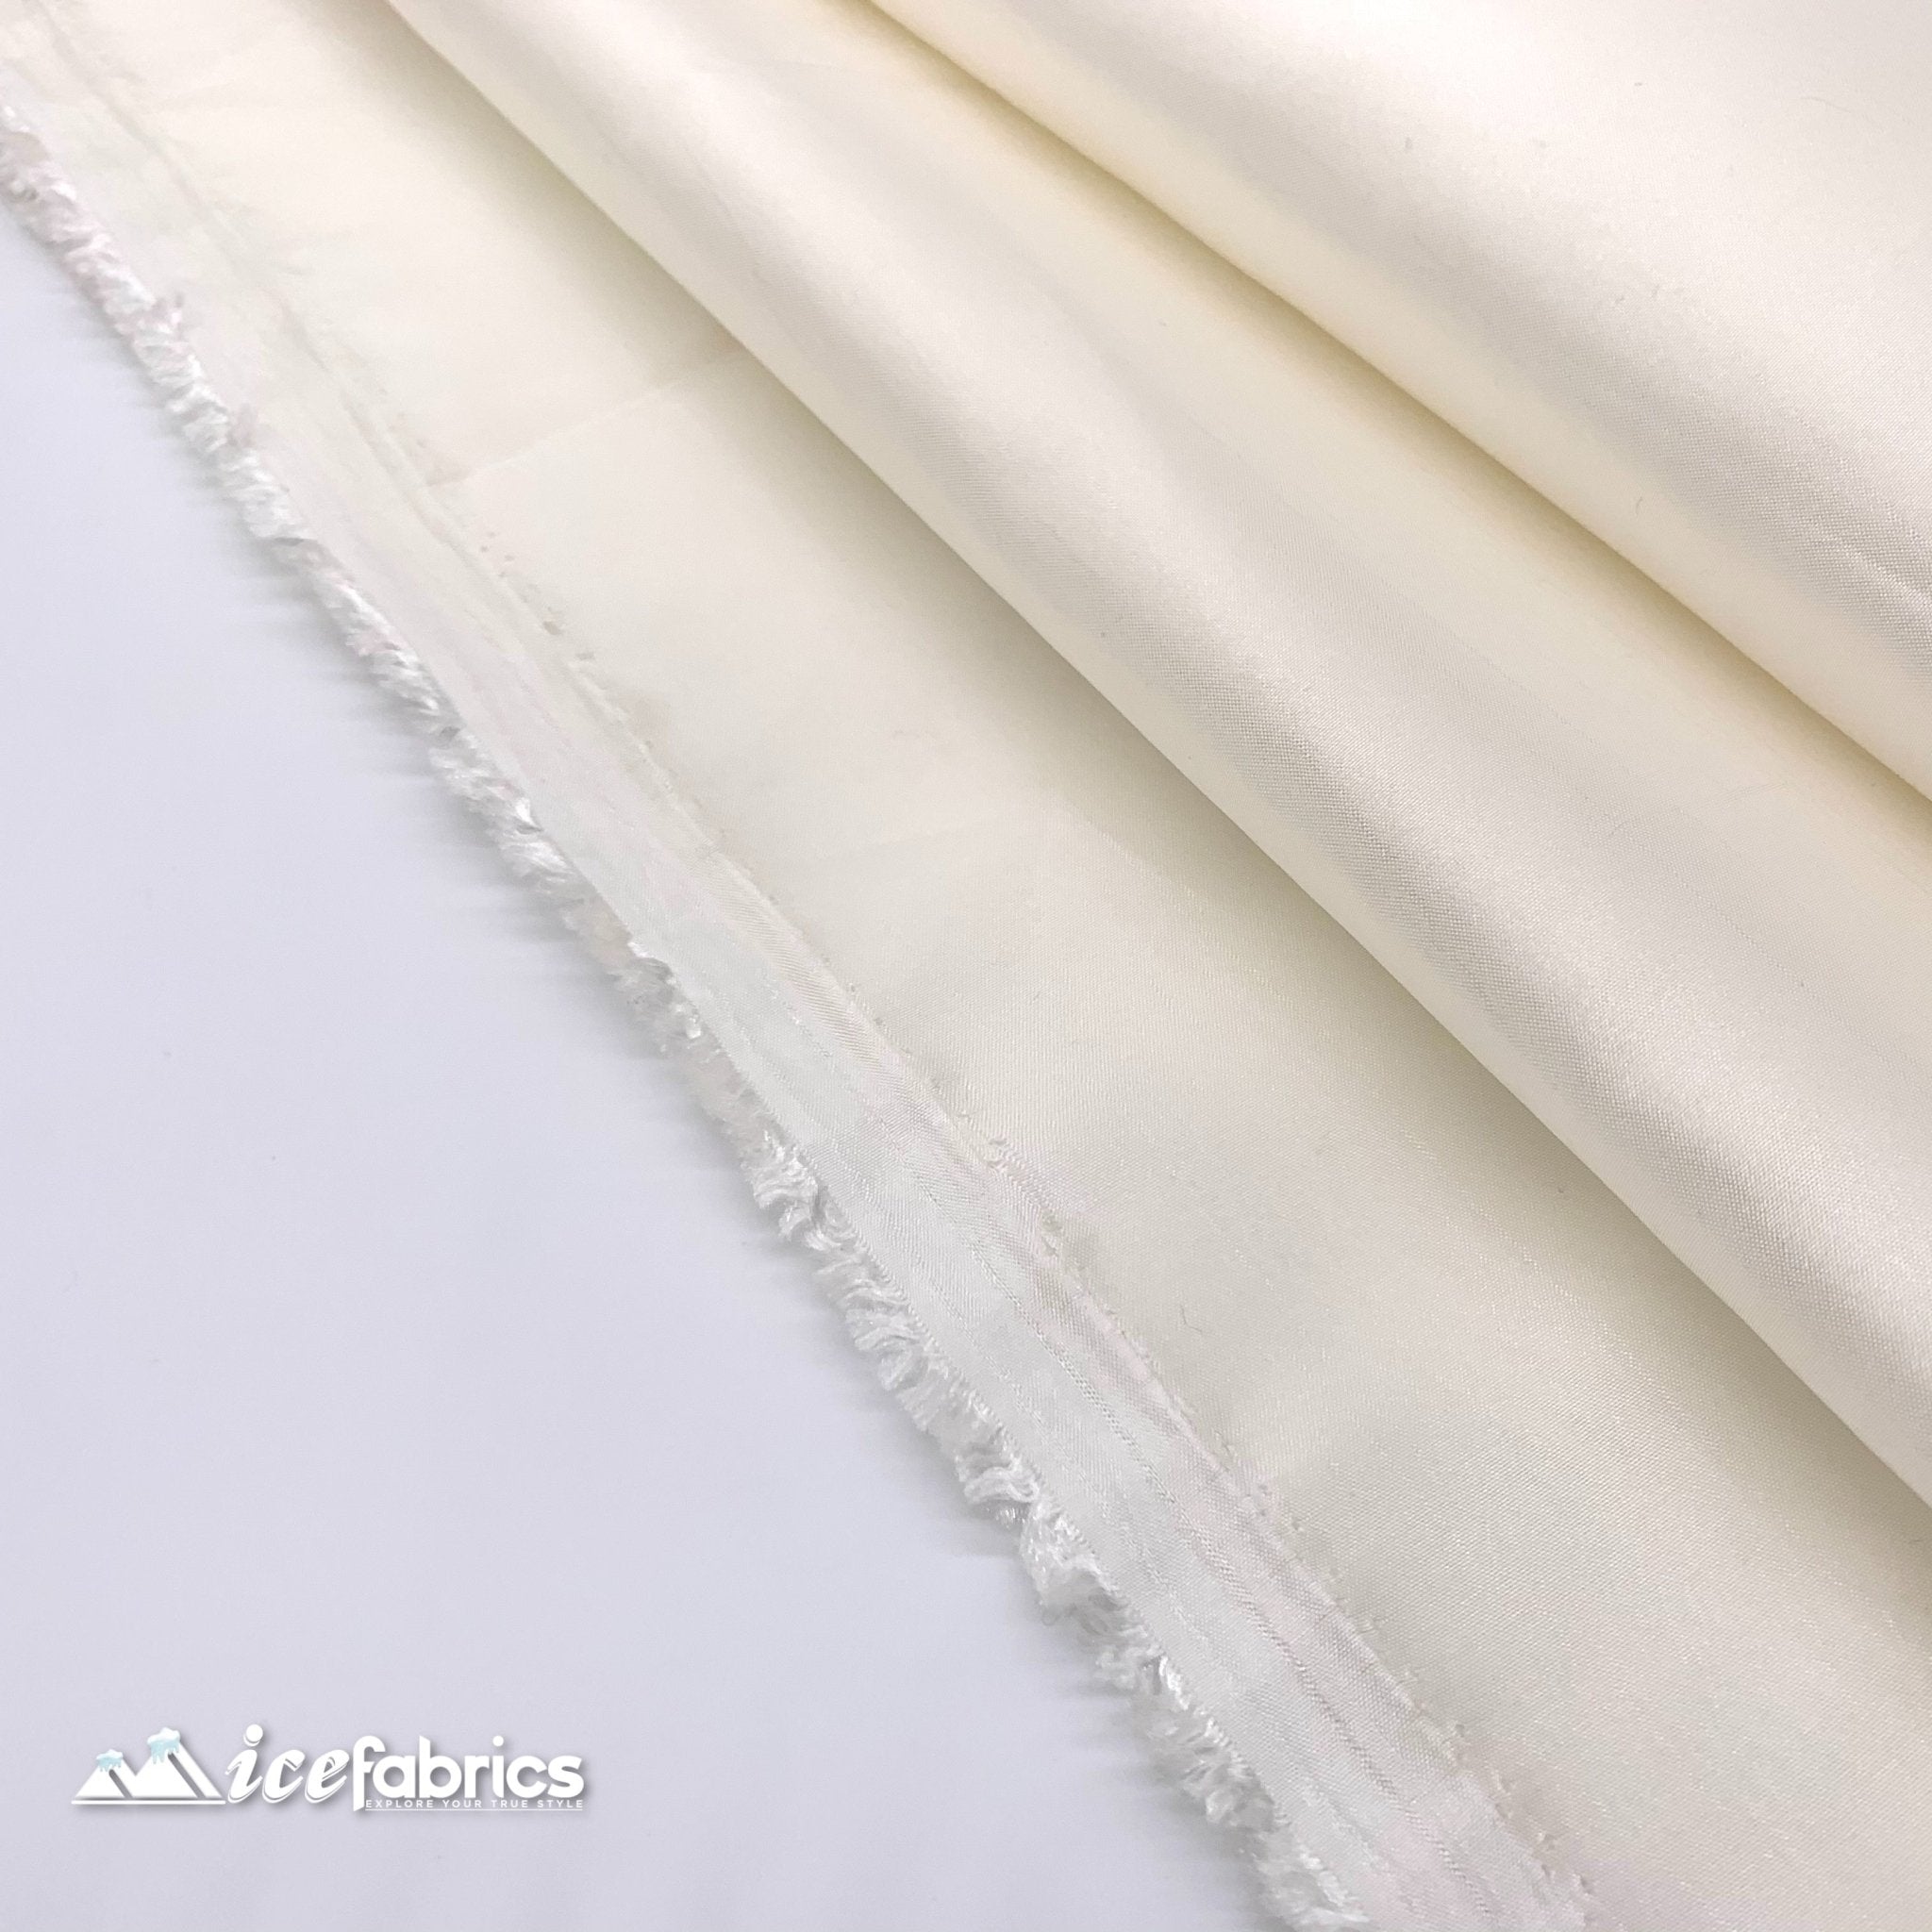 High Quality Solid Taffeta Fabric_ 60" Width_ By The YardTaffeta FabricICEFABRICICE FABRICSOff WhiteHigh Quality Solid Taffeta Fabric_ 60" Width_ By The YardTaffeta FabricICEFABRICICE FABRICSOff WhiteHigh Quality Solid Taffeta Fabric_ 60" Width_ By The Yard ICEFABRIC Off White